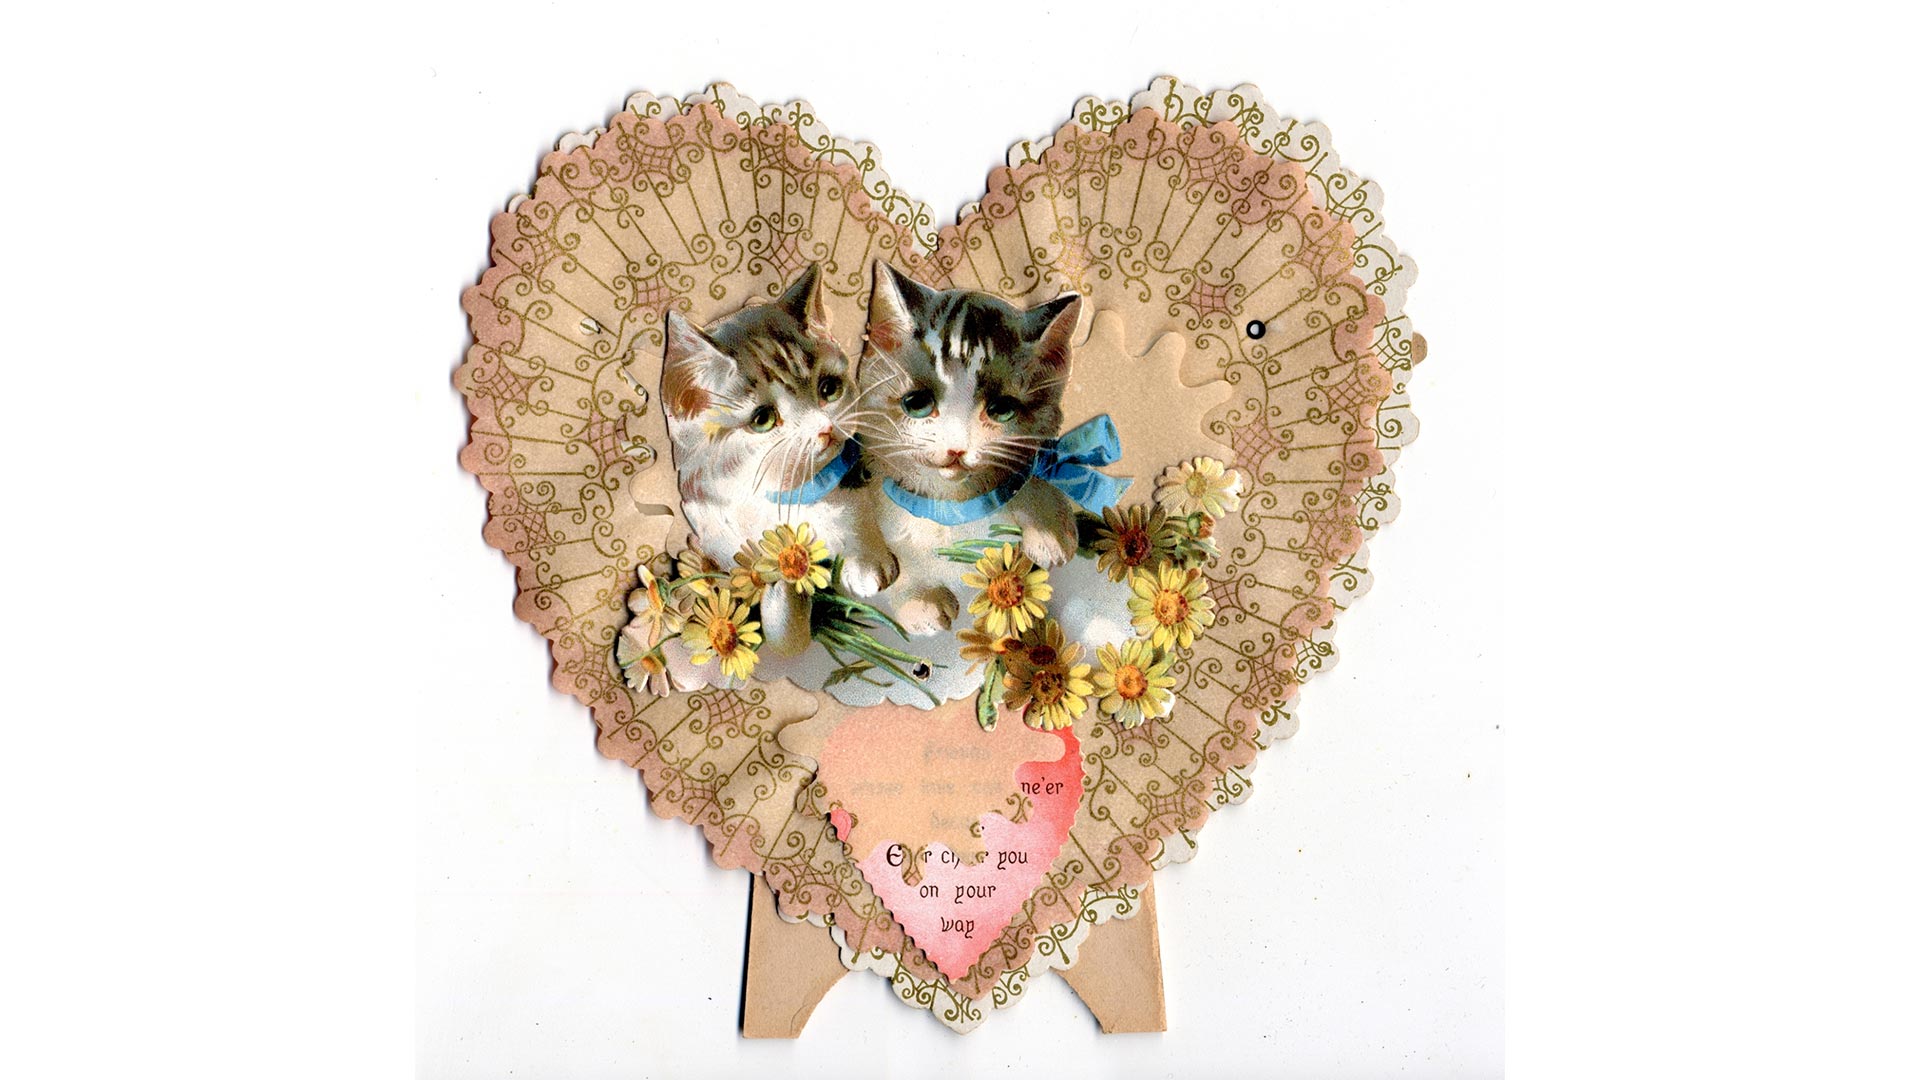 Victorian valentine, with two illustrated cats on a paper heart shape